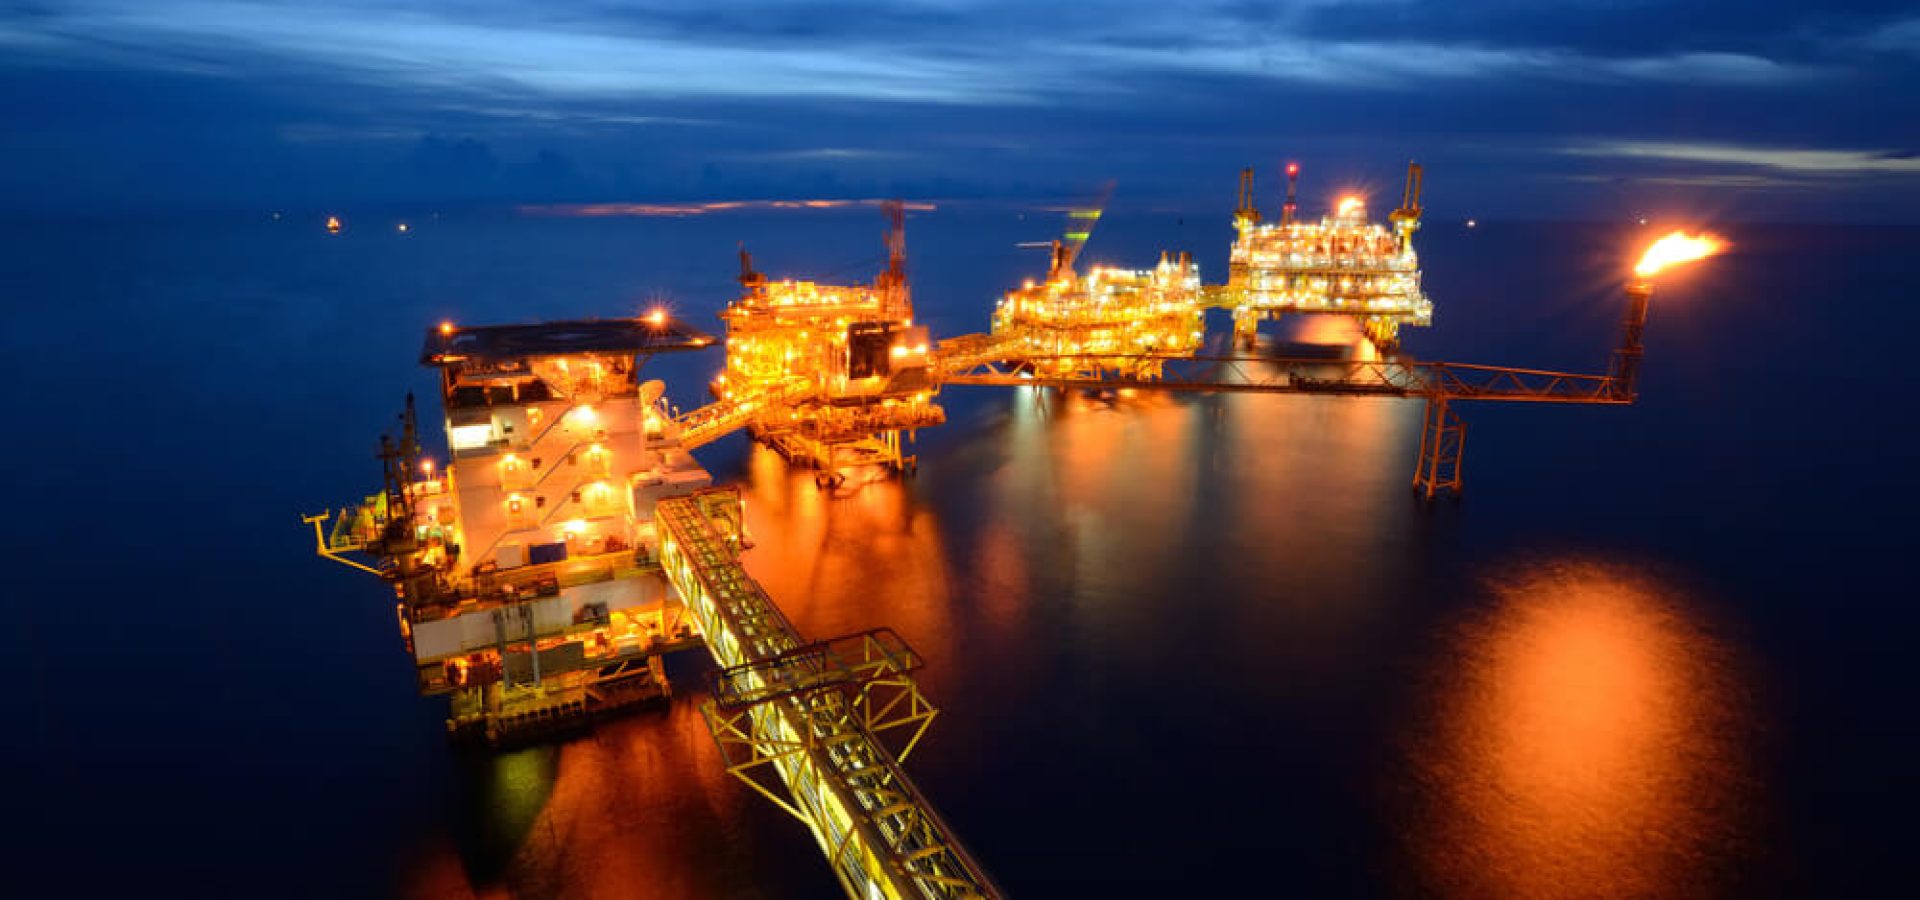 The large offshore oil rig at night with twilight background